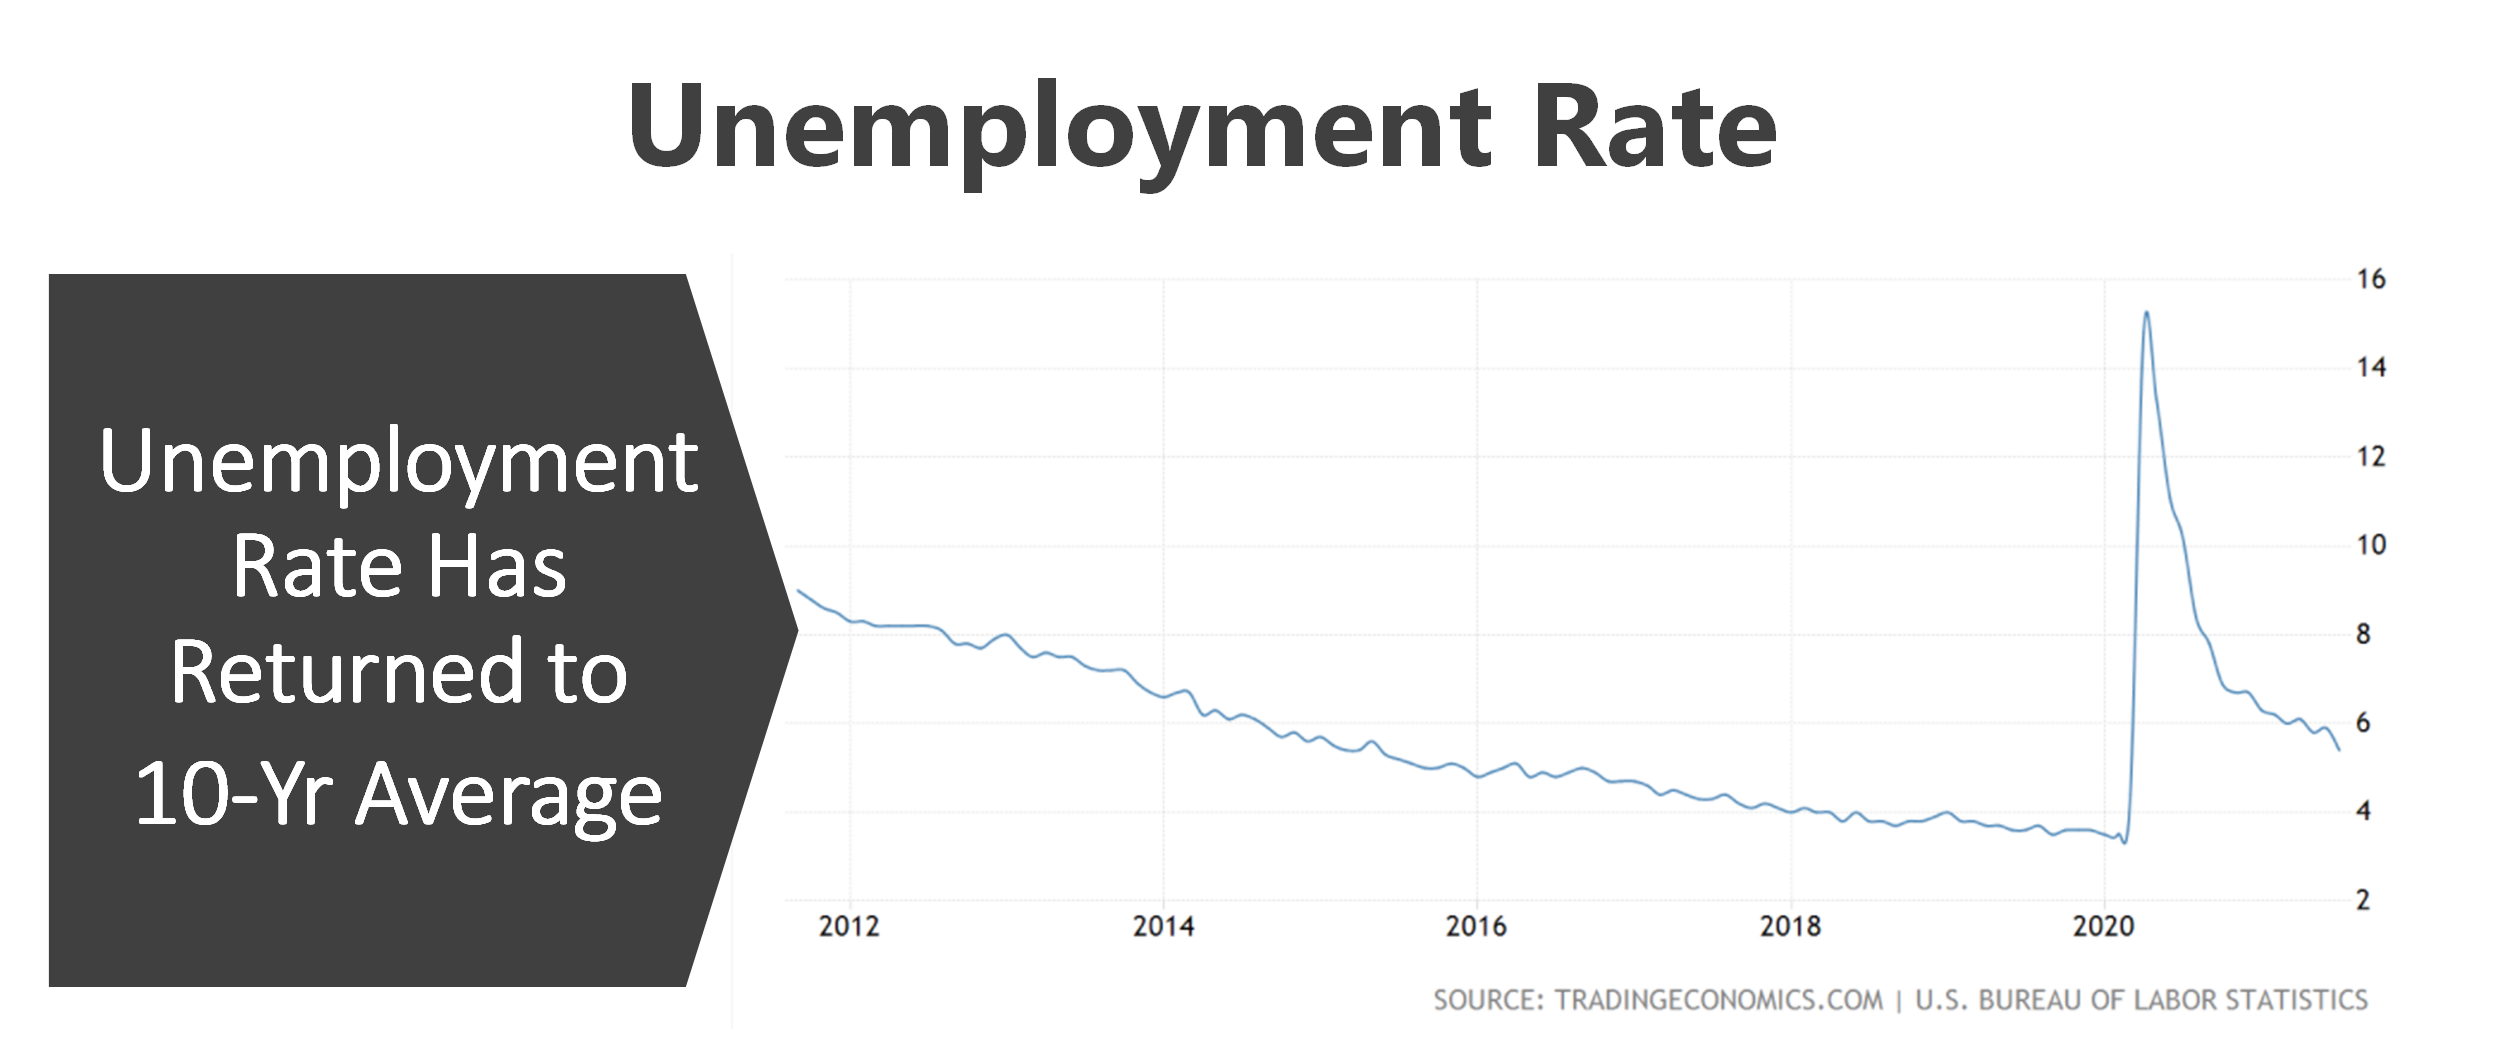 A chart depicting the unemployment rate